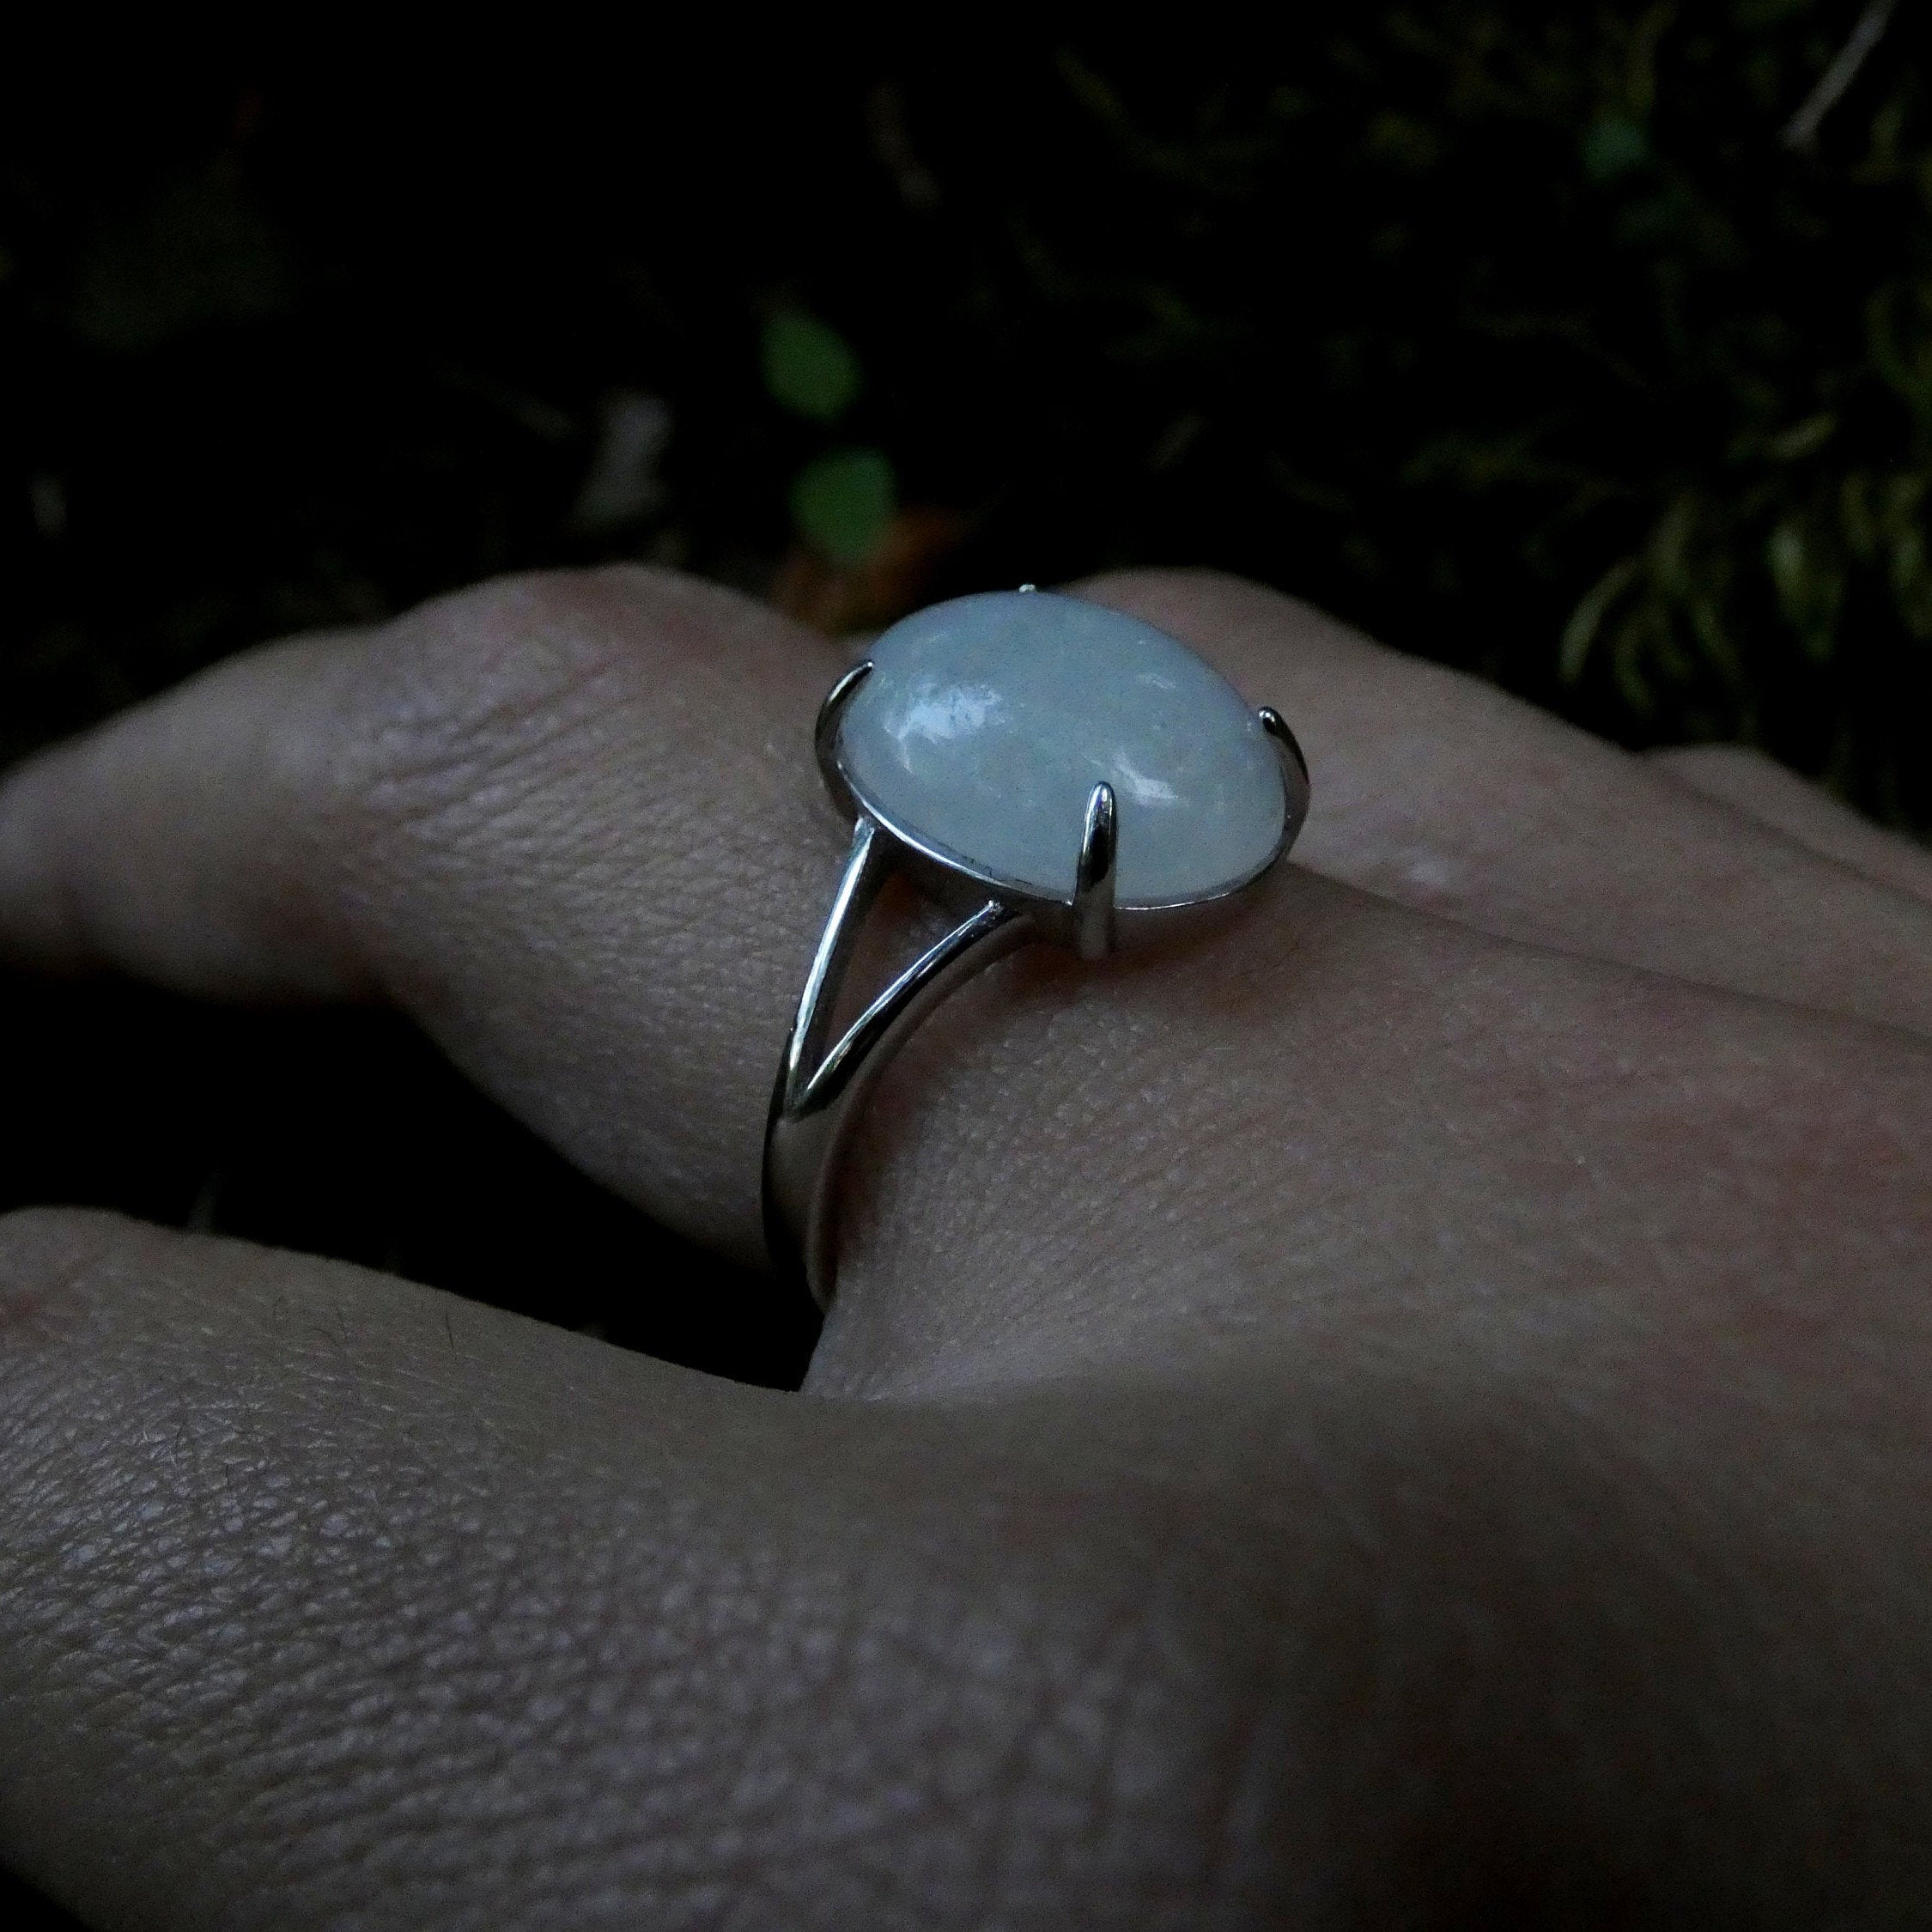 Adding Official Bella Moonstone Ring to collection! I will continue to hunt  down the other pieces from the jewelry line lol. : r/twilight